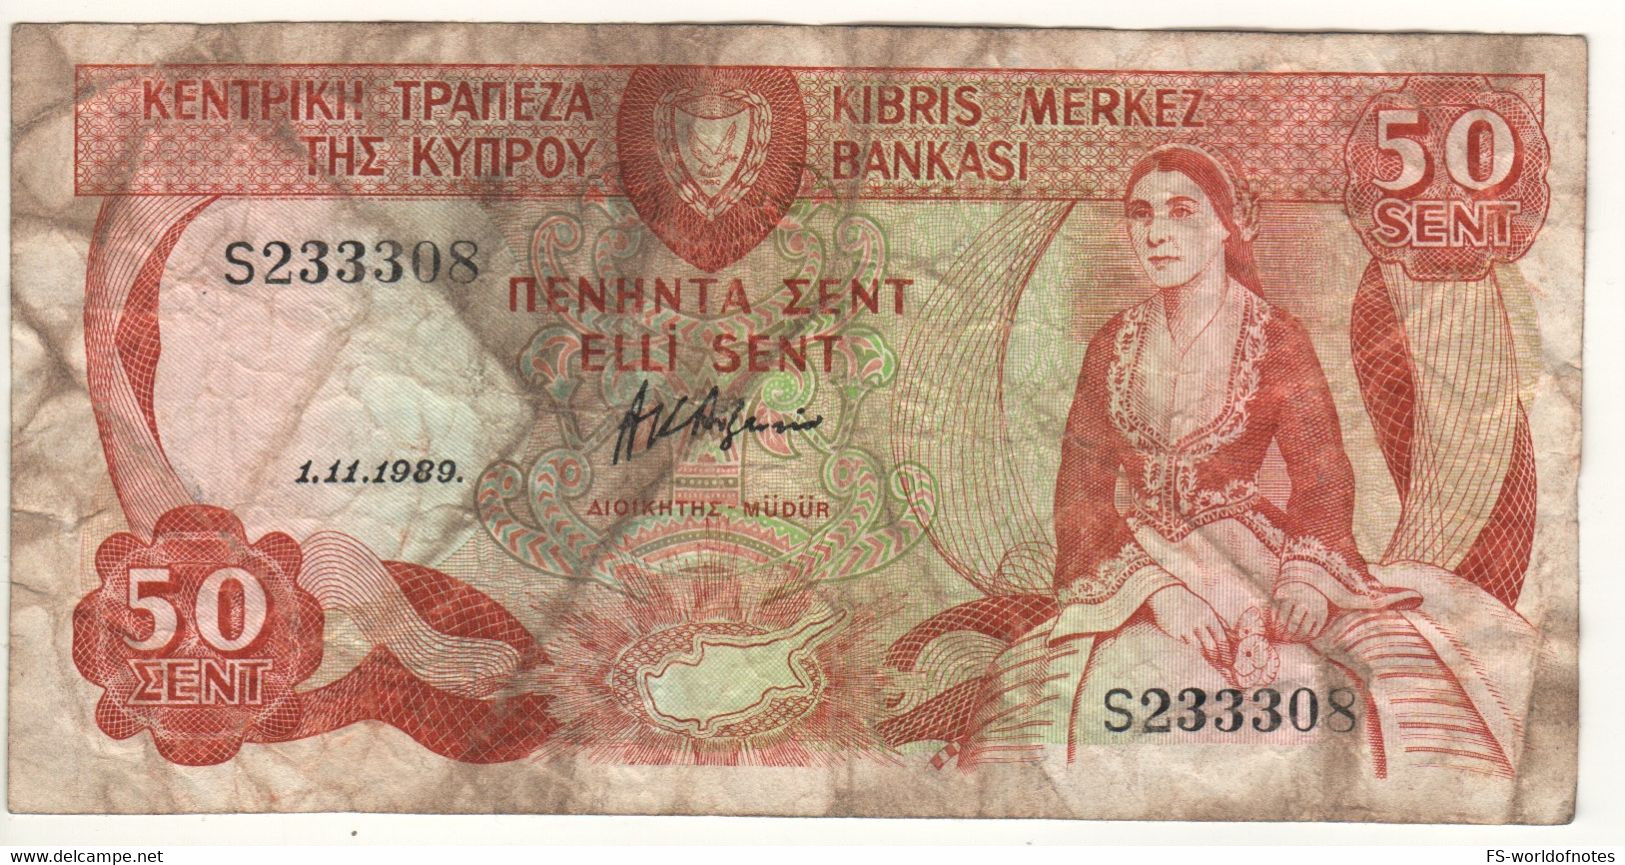 CYPRUS   50 Cents      P52      1.11.1989   ( Woman In Local Costum + Yermasoyia Dam At Back ) - Cyprus